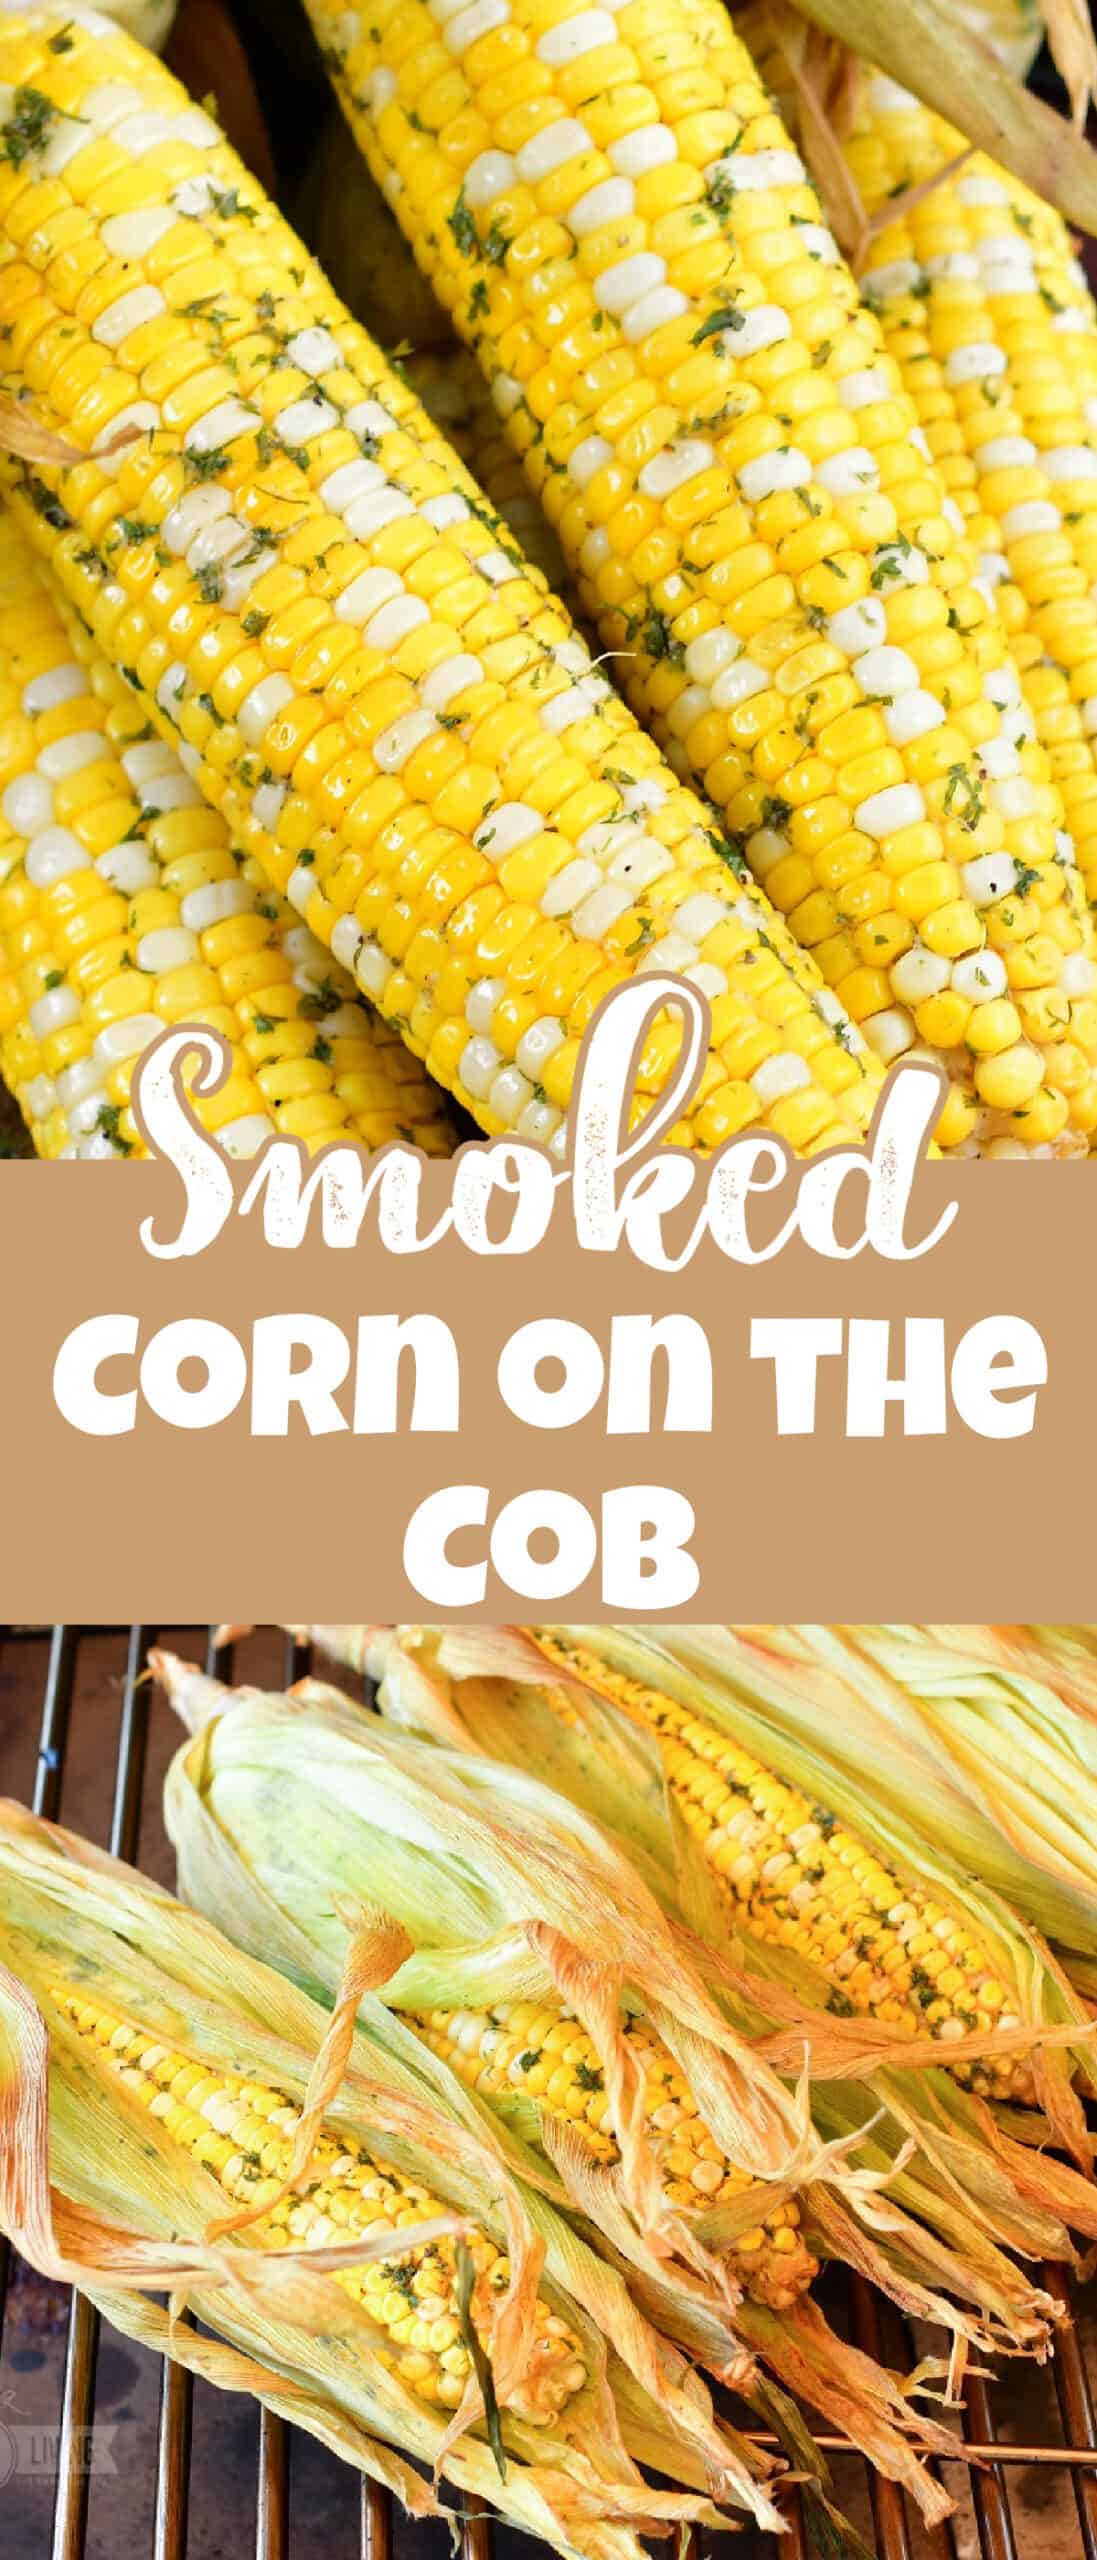 title collage of two images of smoked corn on the cob